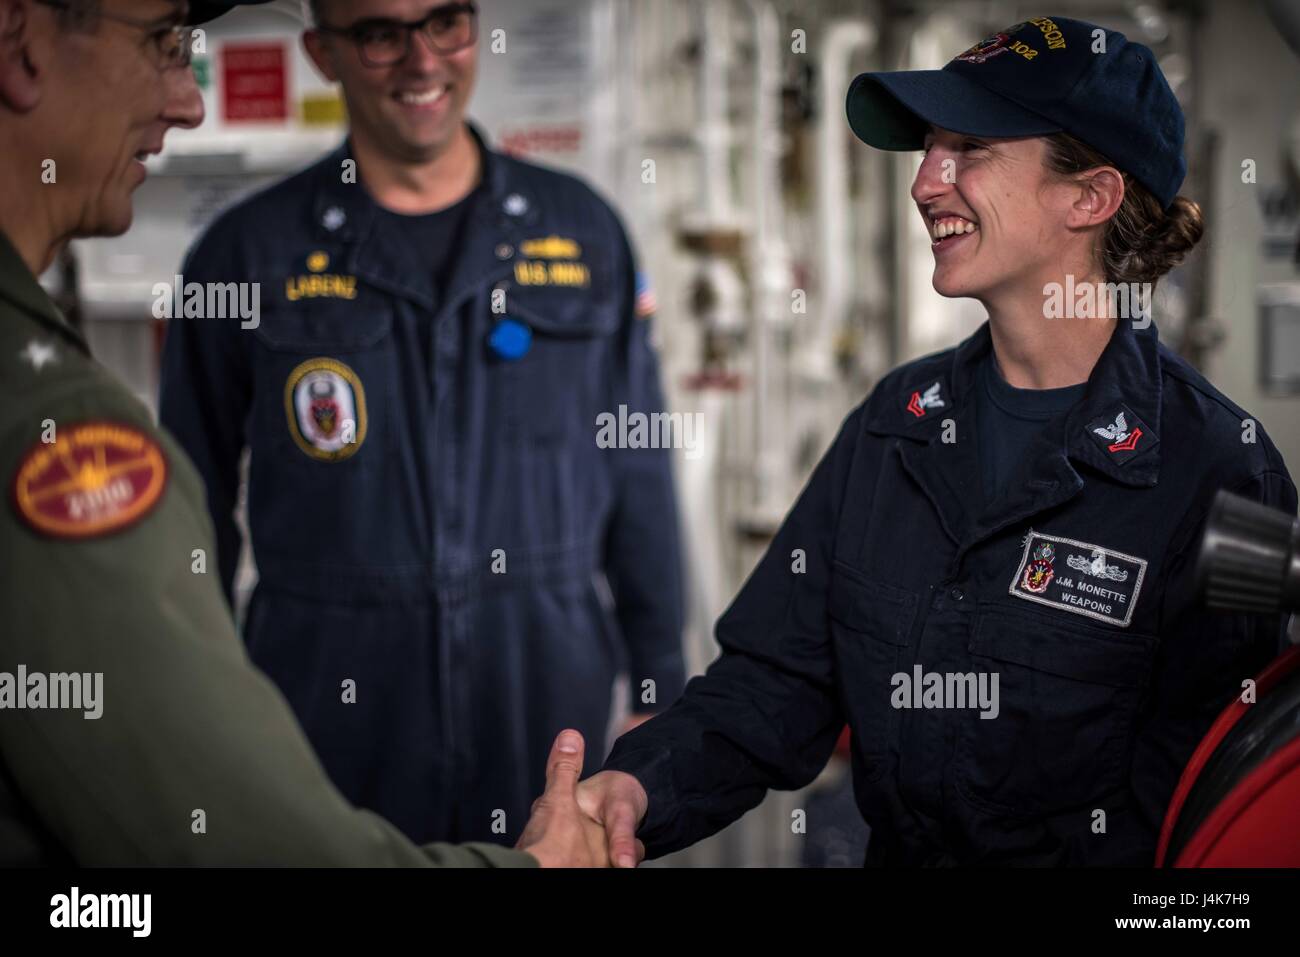 170503-N-TV230-243 PACIFIC OCEAN (May 3, 2017) A Sailor receives a challenge coin from Rear Adm. James Bynum, commander of Carrier Strike Group (CCSG) 9 aboard the guided-missile destroyer USS Sampson (DDG) 102, during a Group Sail training unit exercise (GRUSL) with the Theodore Roosevelt Carrier strike Group (TRCSG). GRUSL is the first step in the Theodore Roosevelt’s integrated training phase and aims to enhance mission-readiness and warfighting capabilities between the ships, airwing and the staffs of the TRCSG through simulated real-world scenarios. (U.S. Navy Photo by Mass Communication  Stock Photo